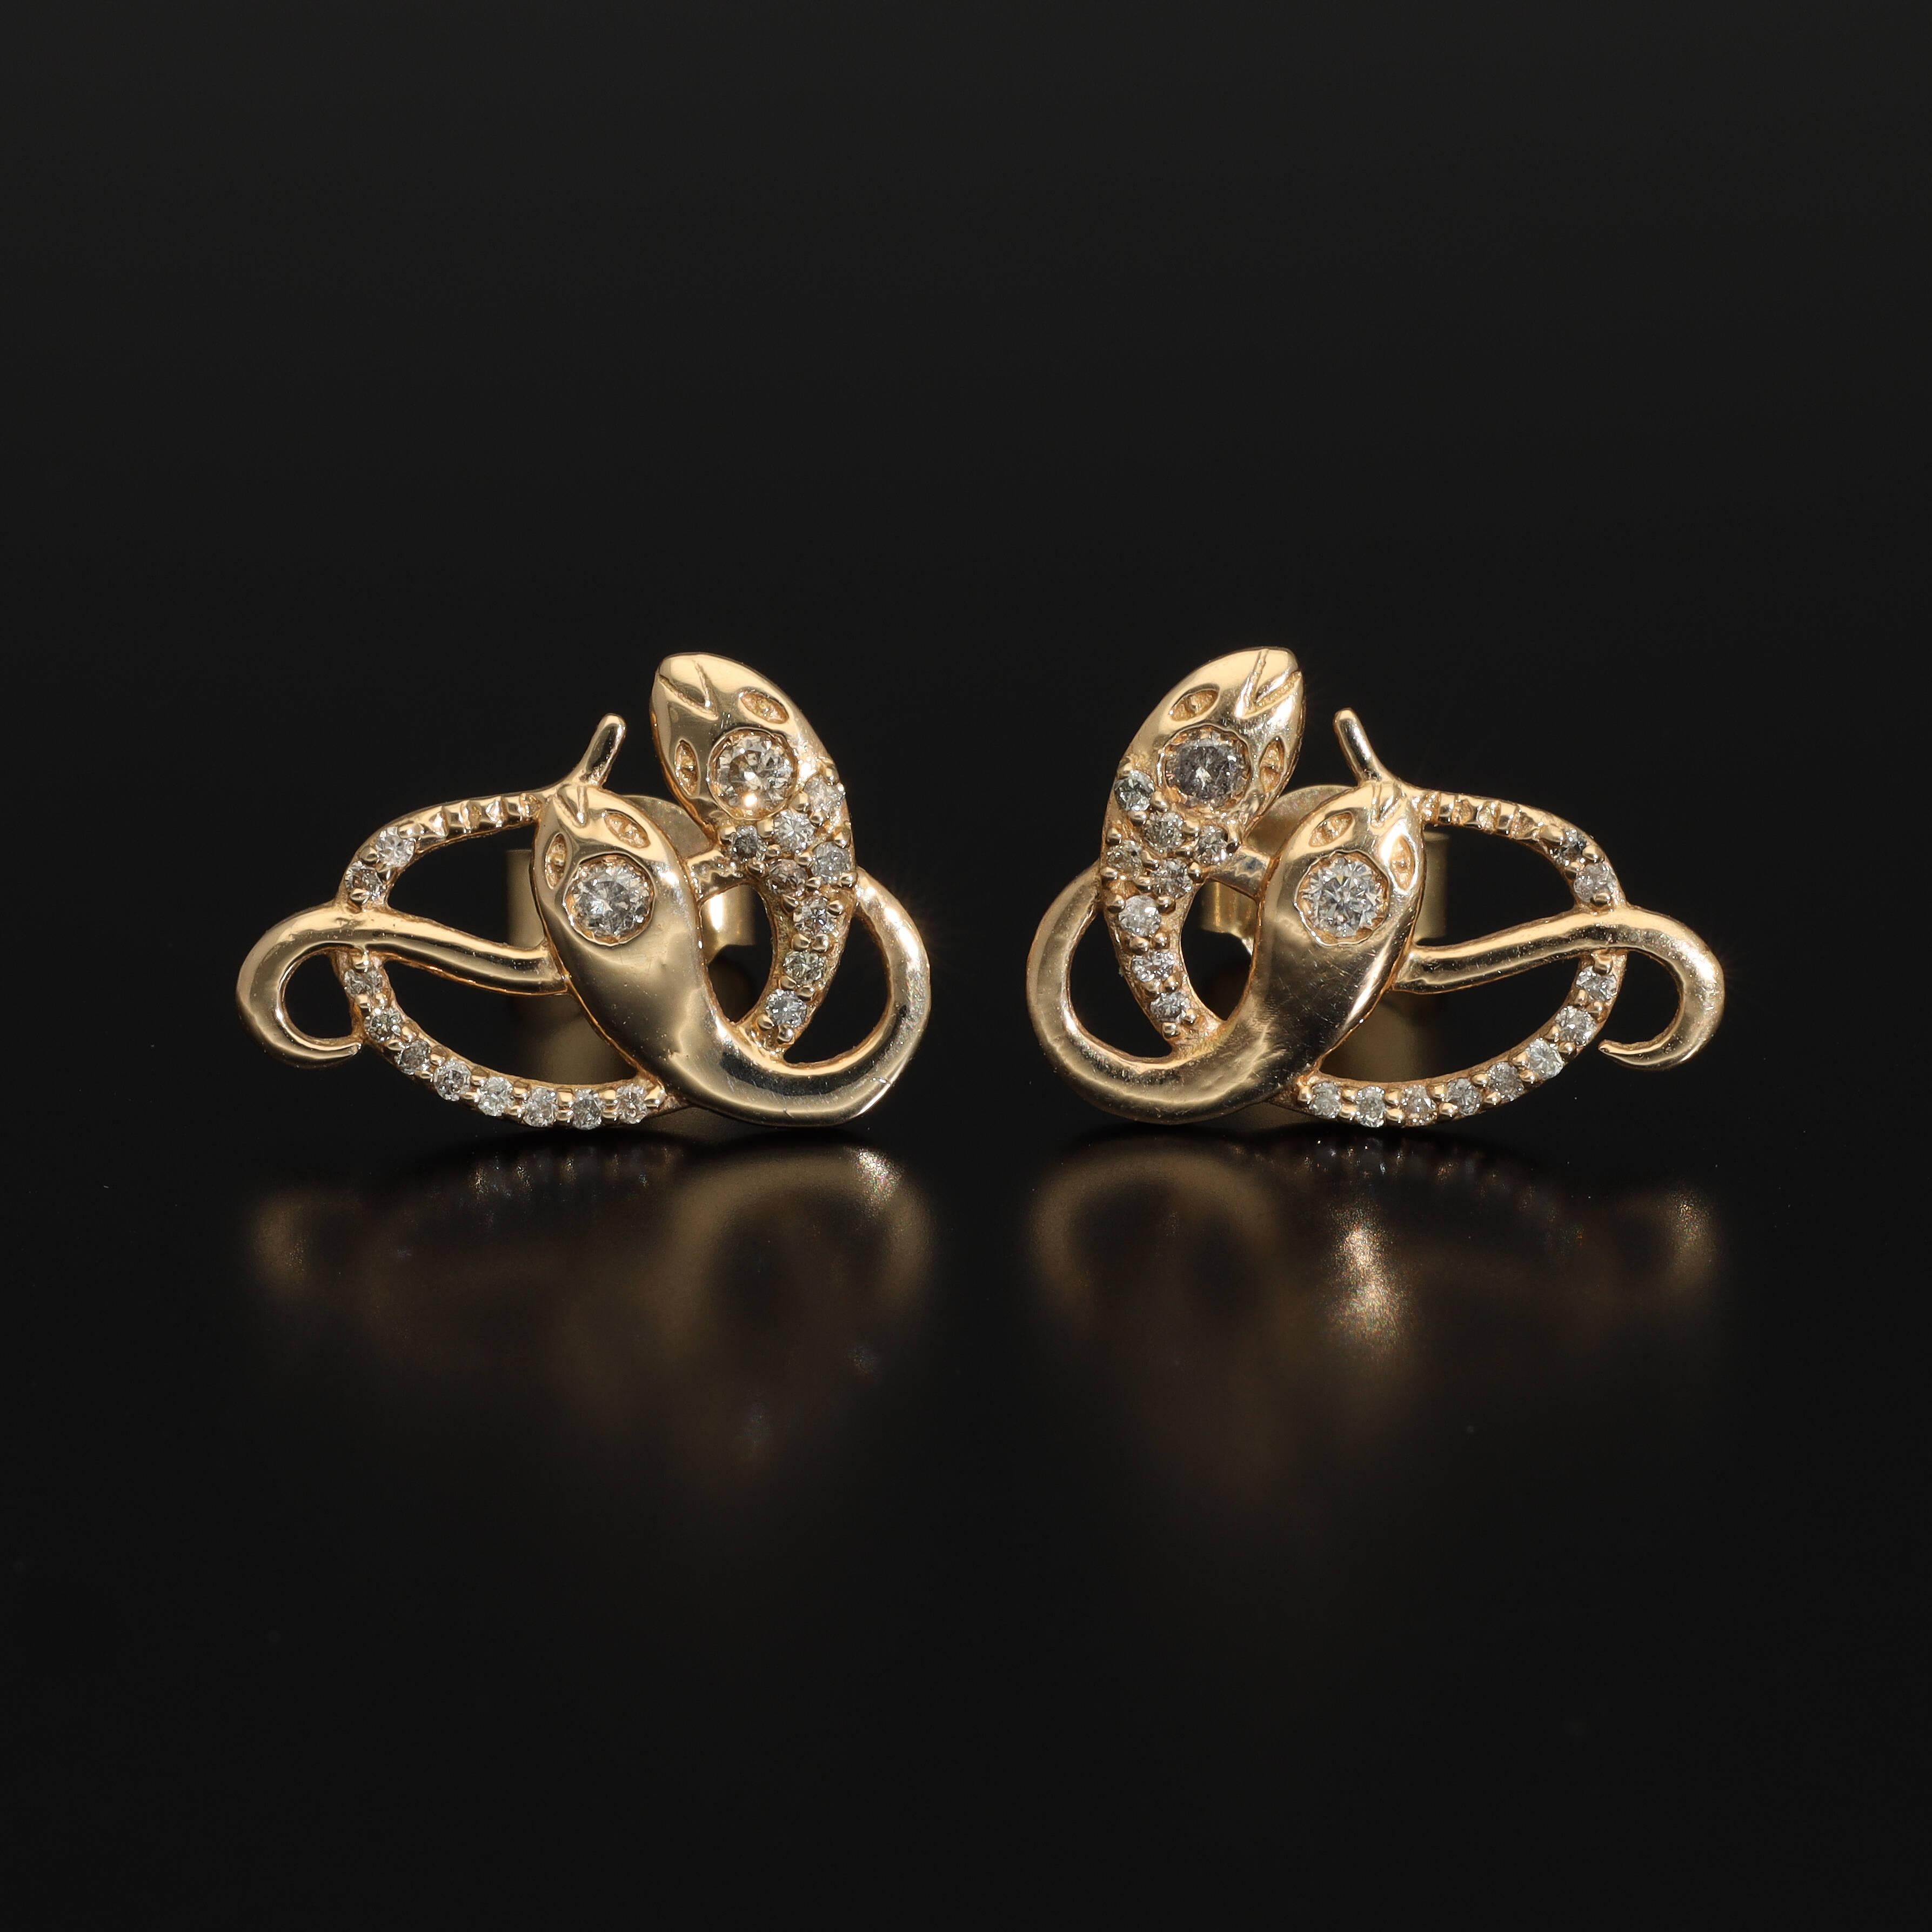 An artisan antique revival solid 14ct gold snake stud earring. This single snake earring is made of pure 14 carat gold and is set with natural diamonds. We have it both in white, rose and yellow gold, so please choose your preferred metal in the